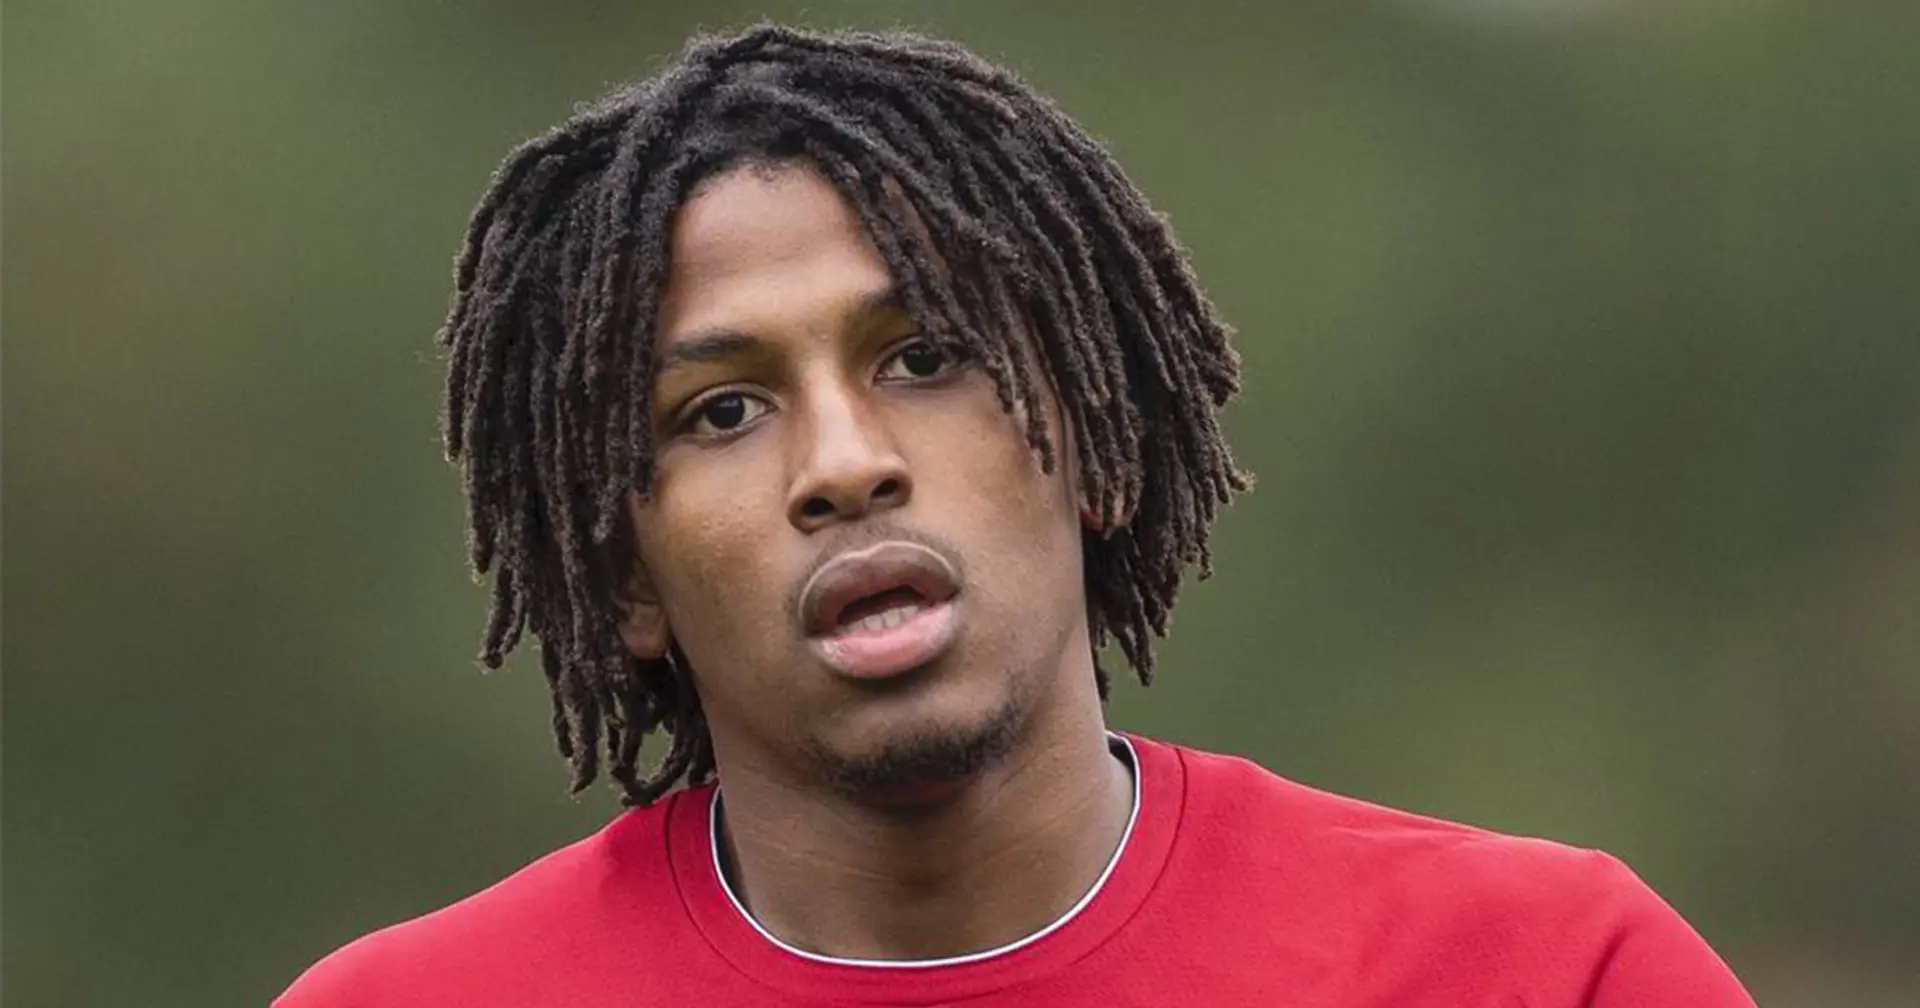 Yasser Larouci expected to leave Liverpool on permanent basis; Brentford said to be frontrunners for left-back's signature